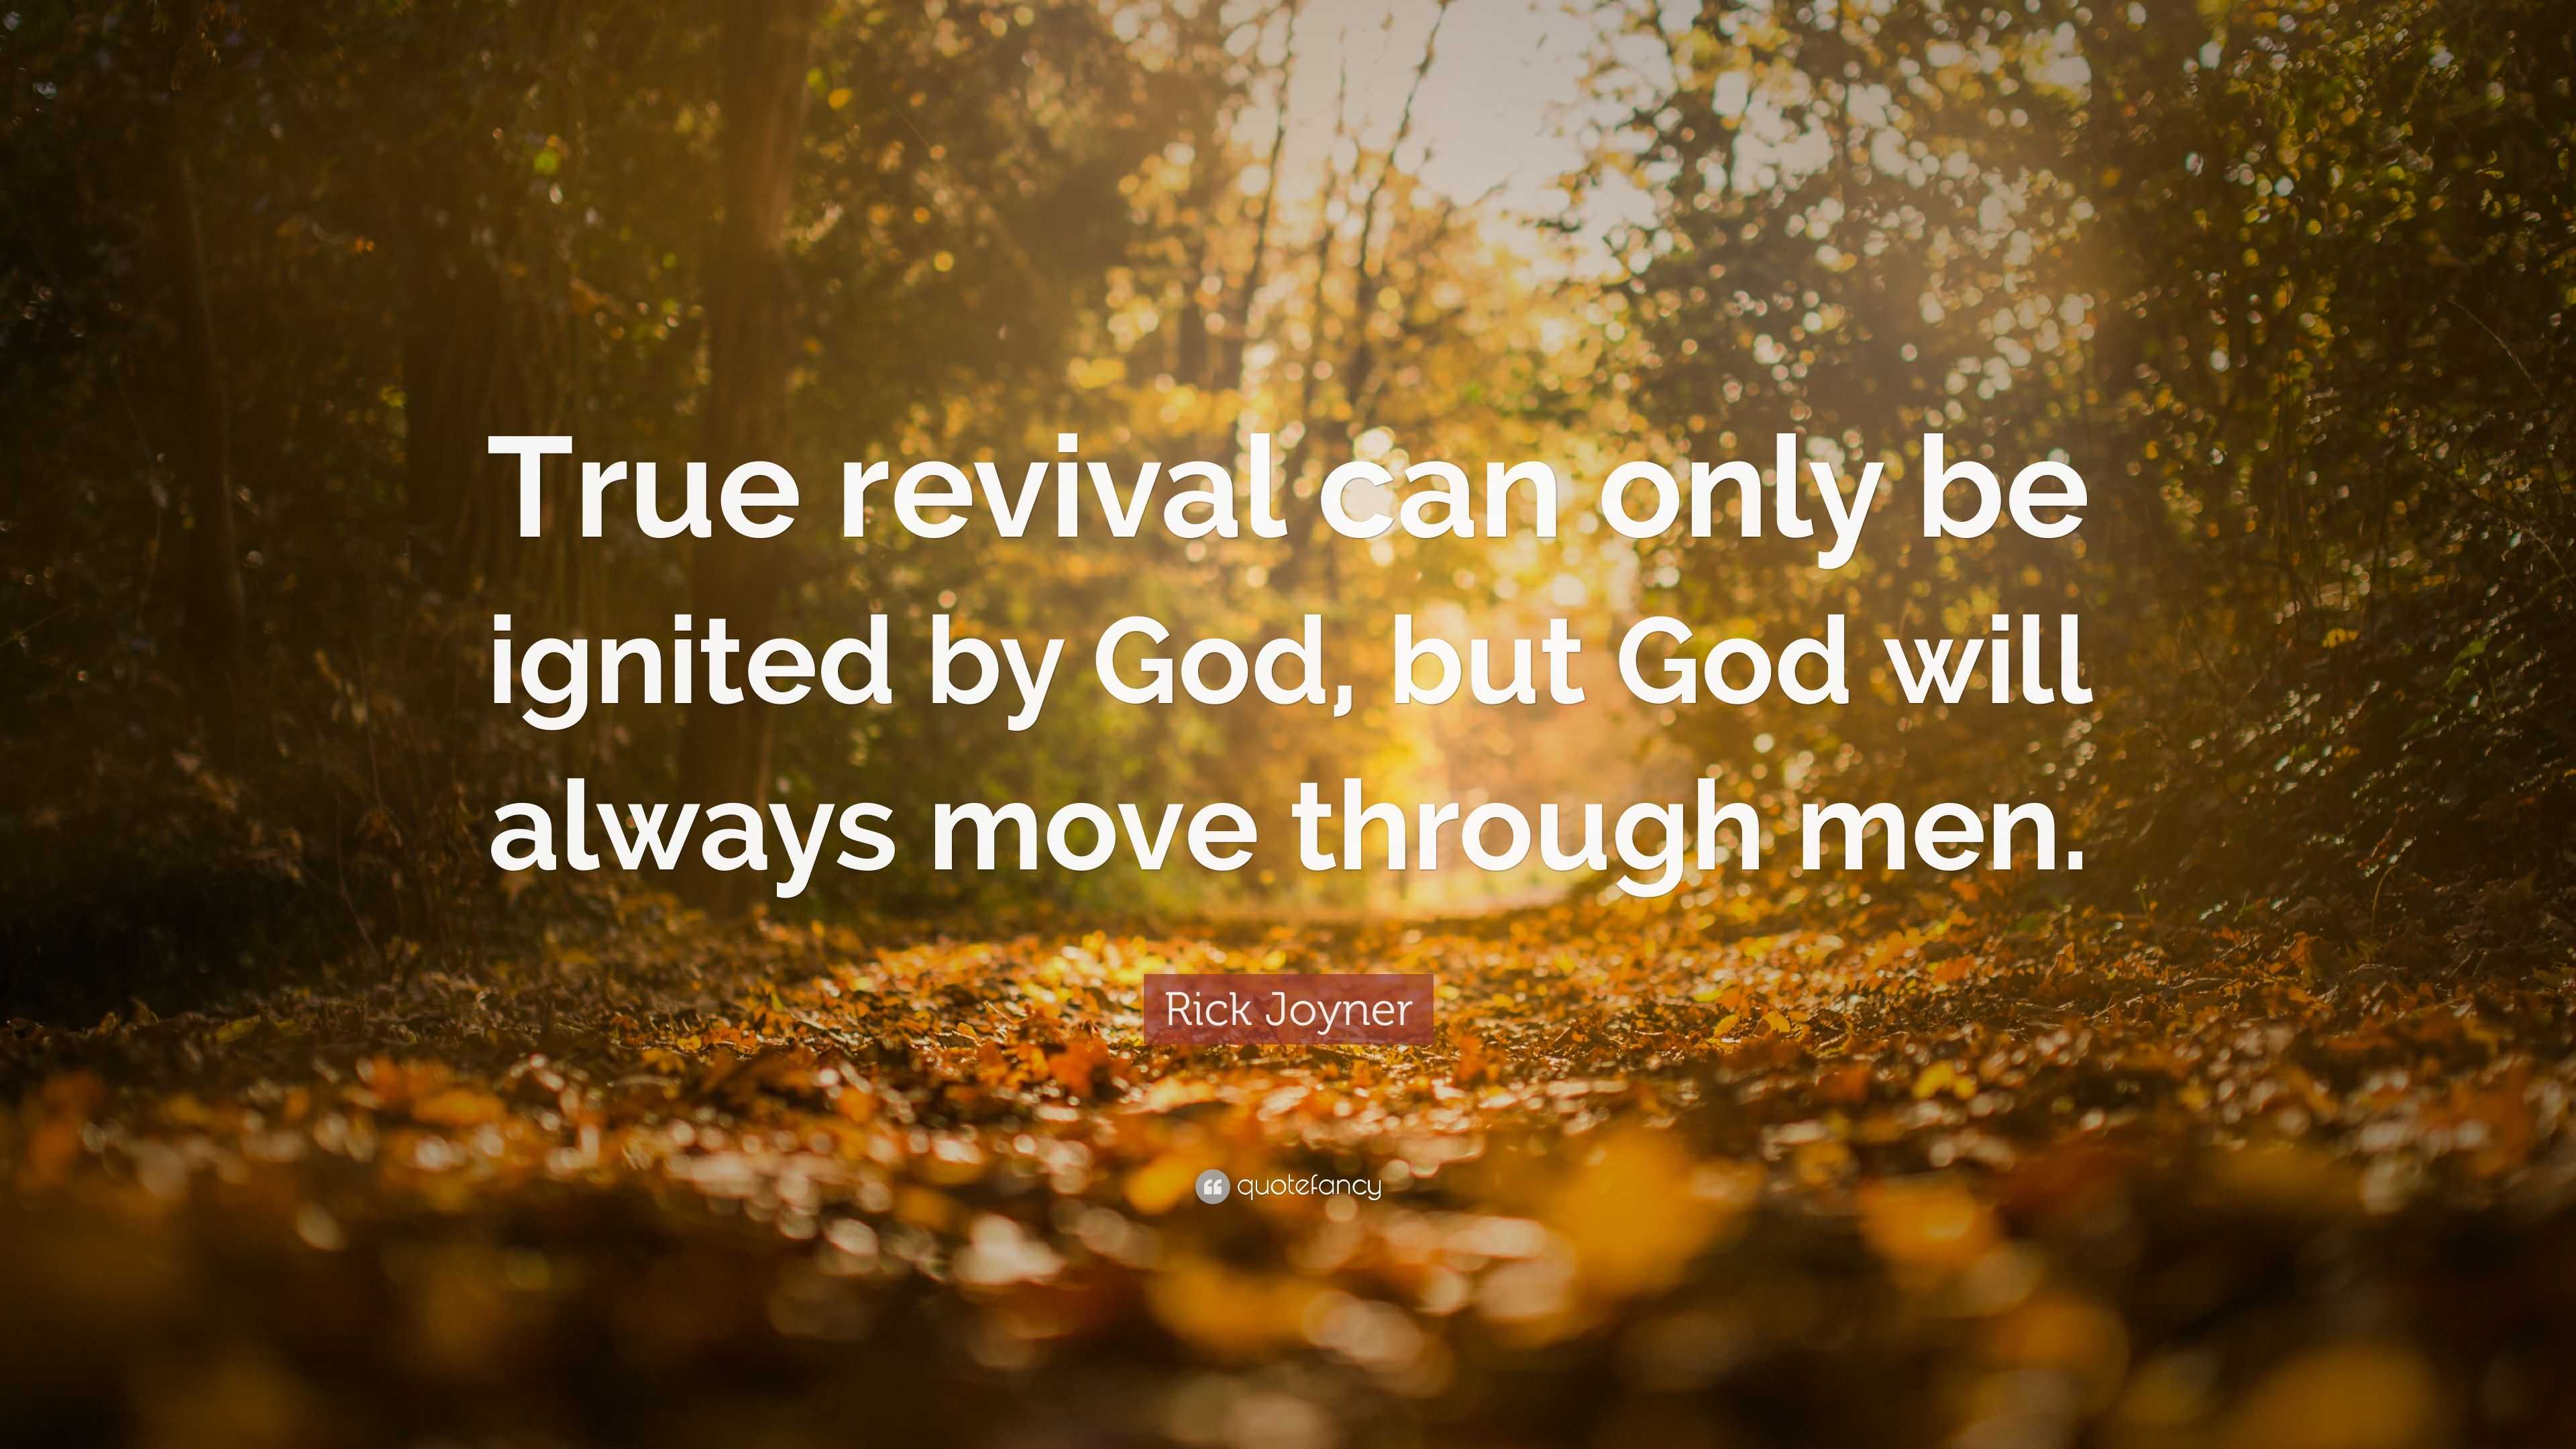 Rick Joyner Quote “True revival can only be ignited by God, but God